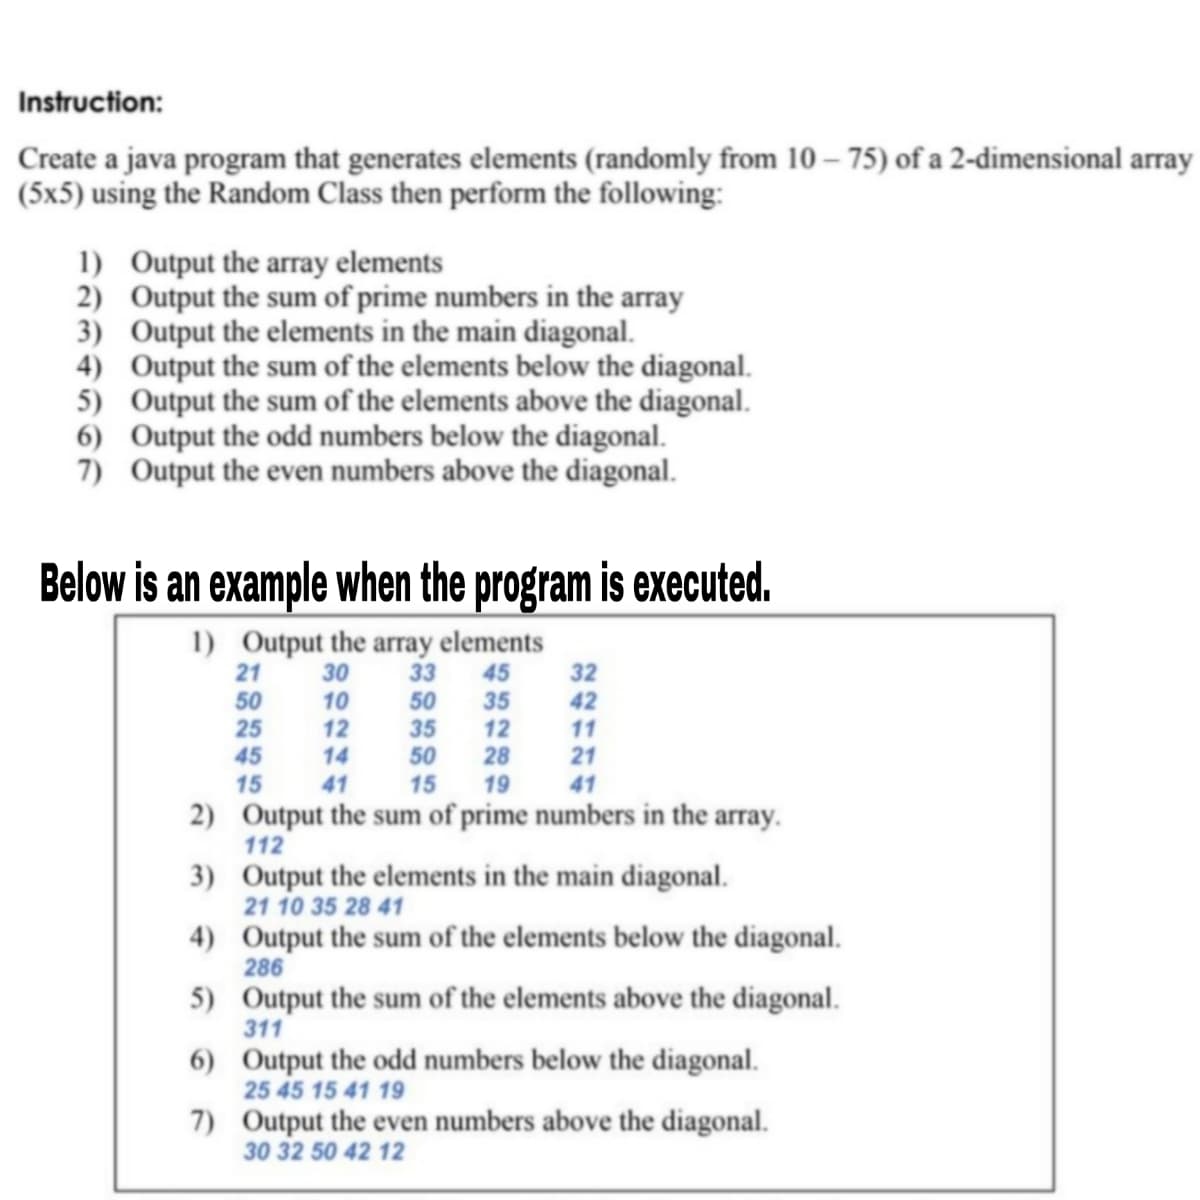 Instruction:
Create a java program that generates elements (randomly from 10 – 75) of a 2-dimensional array
(5x5) using the Random Class then perform the following:
1) Output the array elements
2) Output the sum of prime numbers in the array
3) Output the elements in the main diagonal.
4) Output the sum of the elements below the diagonal.
5) Output the sum of the elements above the diagonal.
6) Output the odd numbers below the diagonal.
7) Output the even numbers above the diagonal.
Below is an example when the program is executed.
1) Output the array elements
33
21
30
45
32
42
50
25
10
12
35
12
28
50
35
50
11
45
14
21
15
41
15
19
41
2) Output the sum of prime numbers in the array.
112
3) Output the elements in the main diagonal.
21 10 35 28 41
4) Output the sum of the elements below the diagonal.
286
5) Output the sum of the elements above the diagonal.
311
6) Output the odd numbers below the diagonal.
25 45 15 41 19
7) Output the even numbers above the diagonal.
30 32 50 42 12
